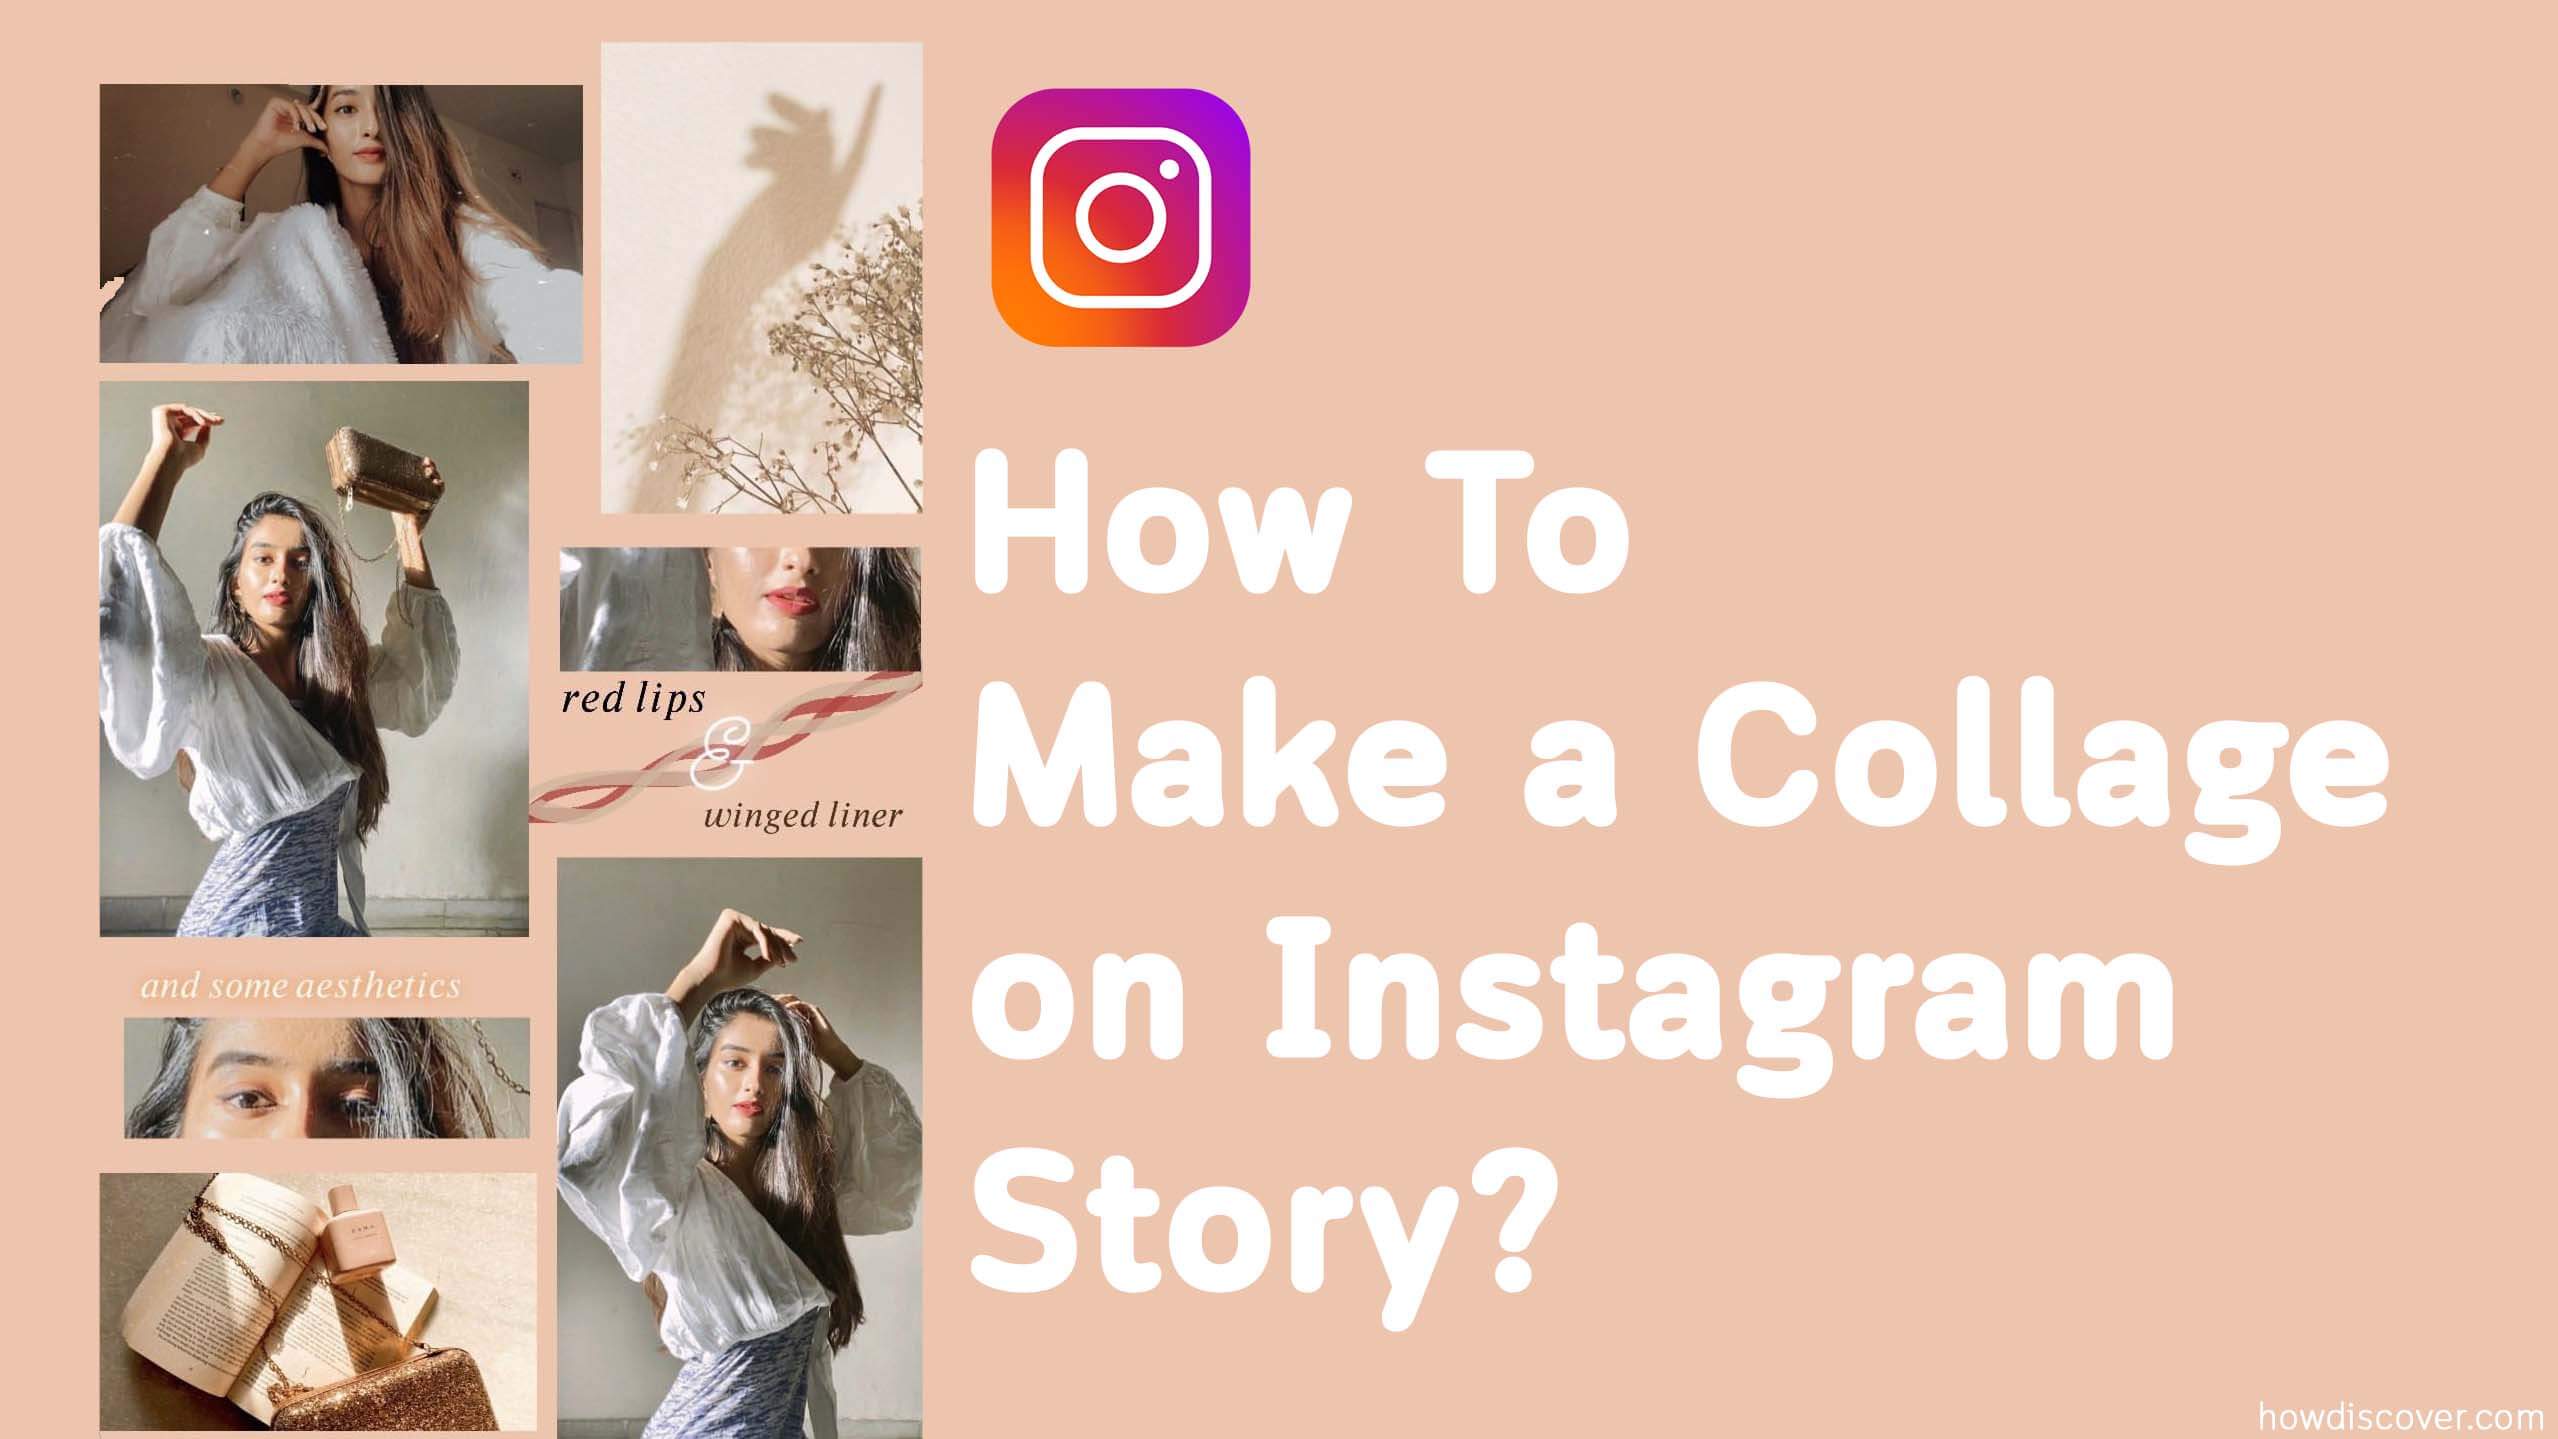 How To Make a Collage on Instagram Story?